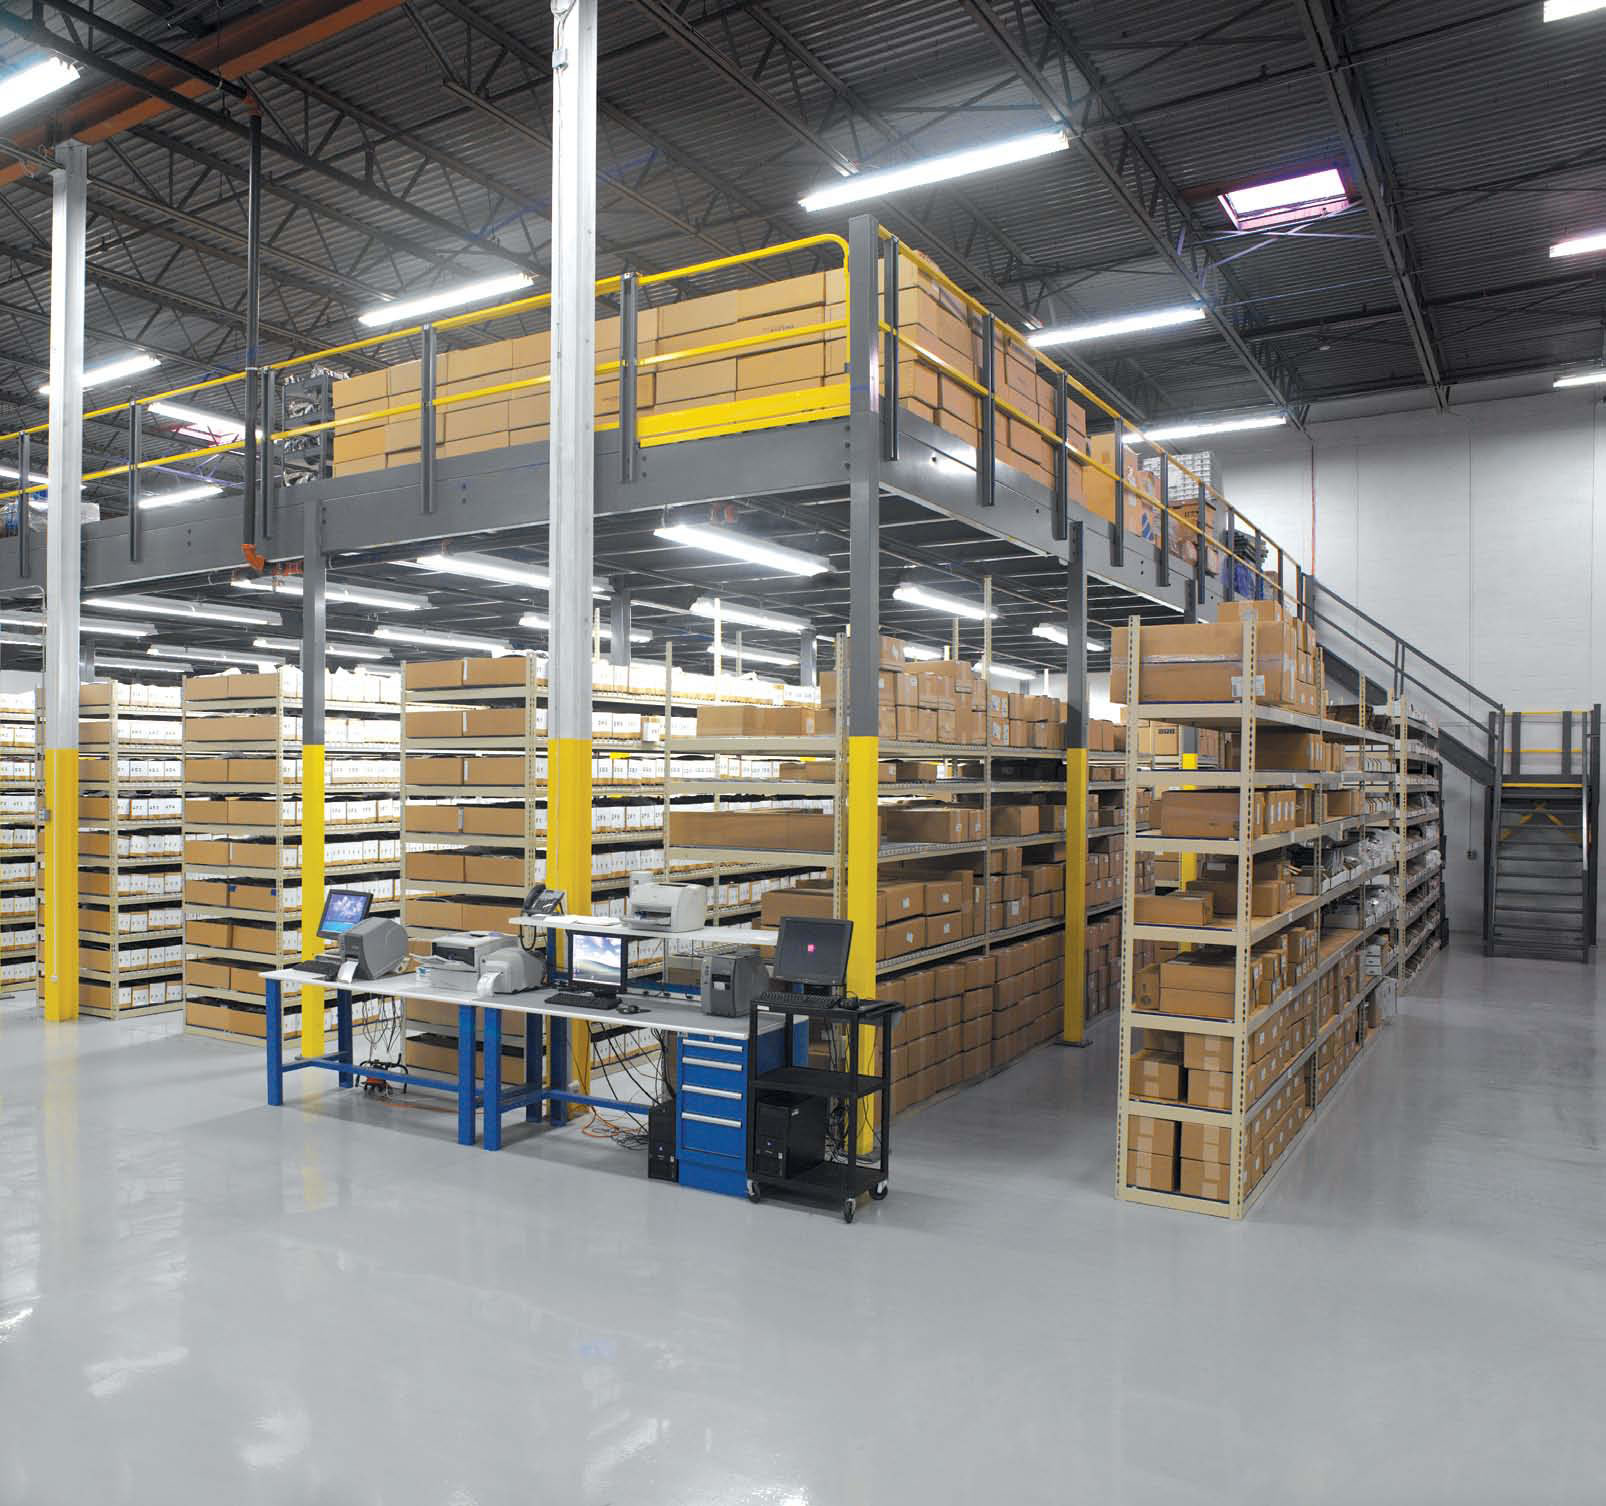 Mezzanines: Save Money AND Get More Storage Space in Your Facility